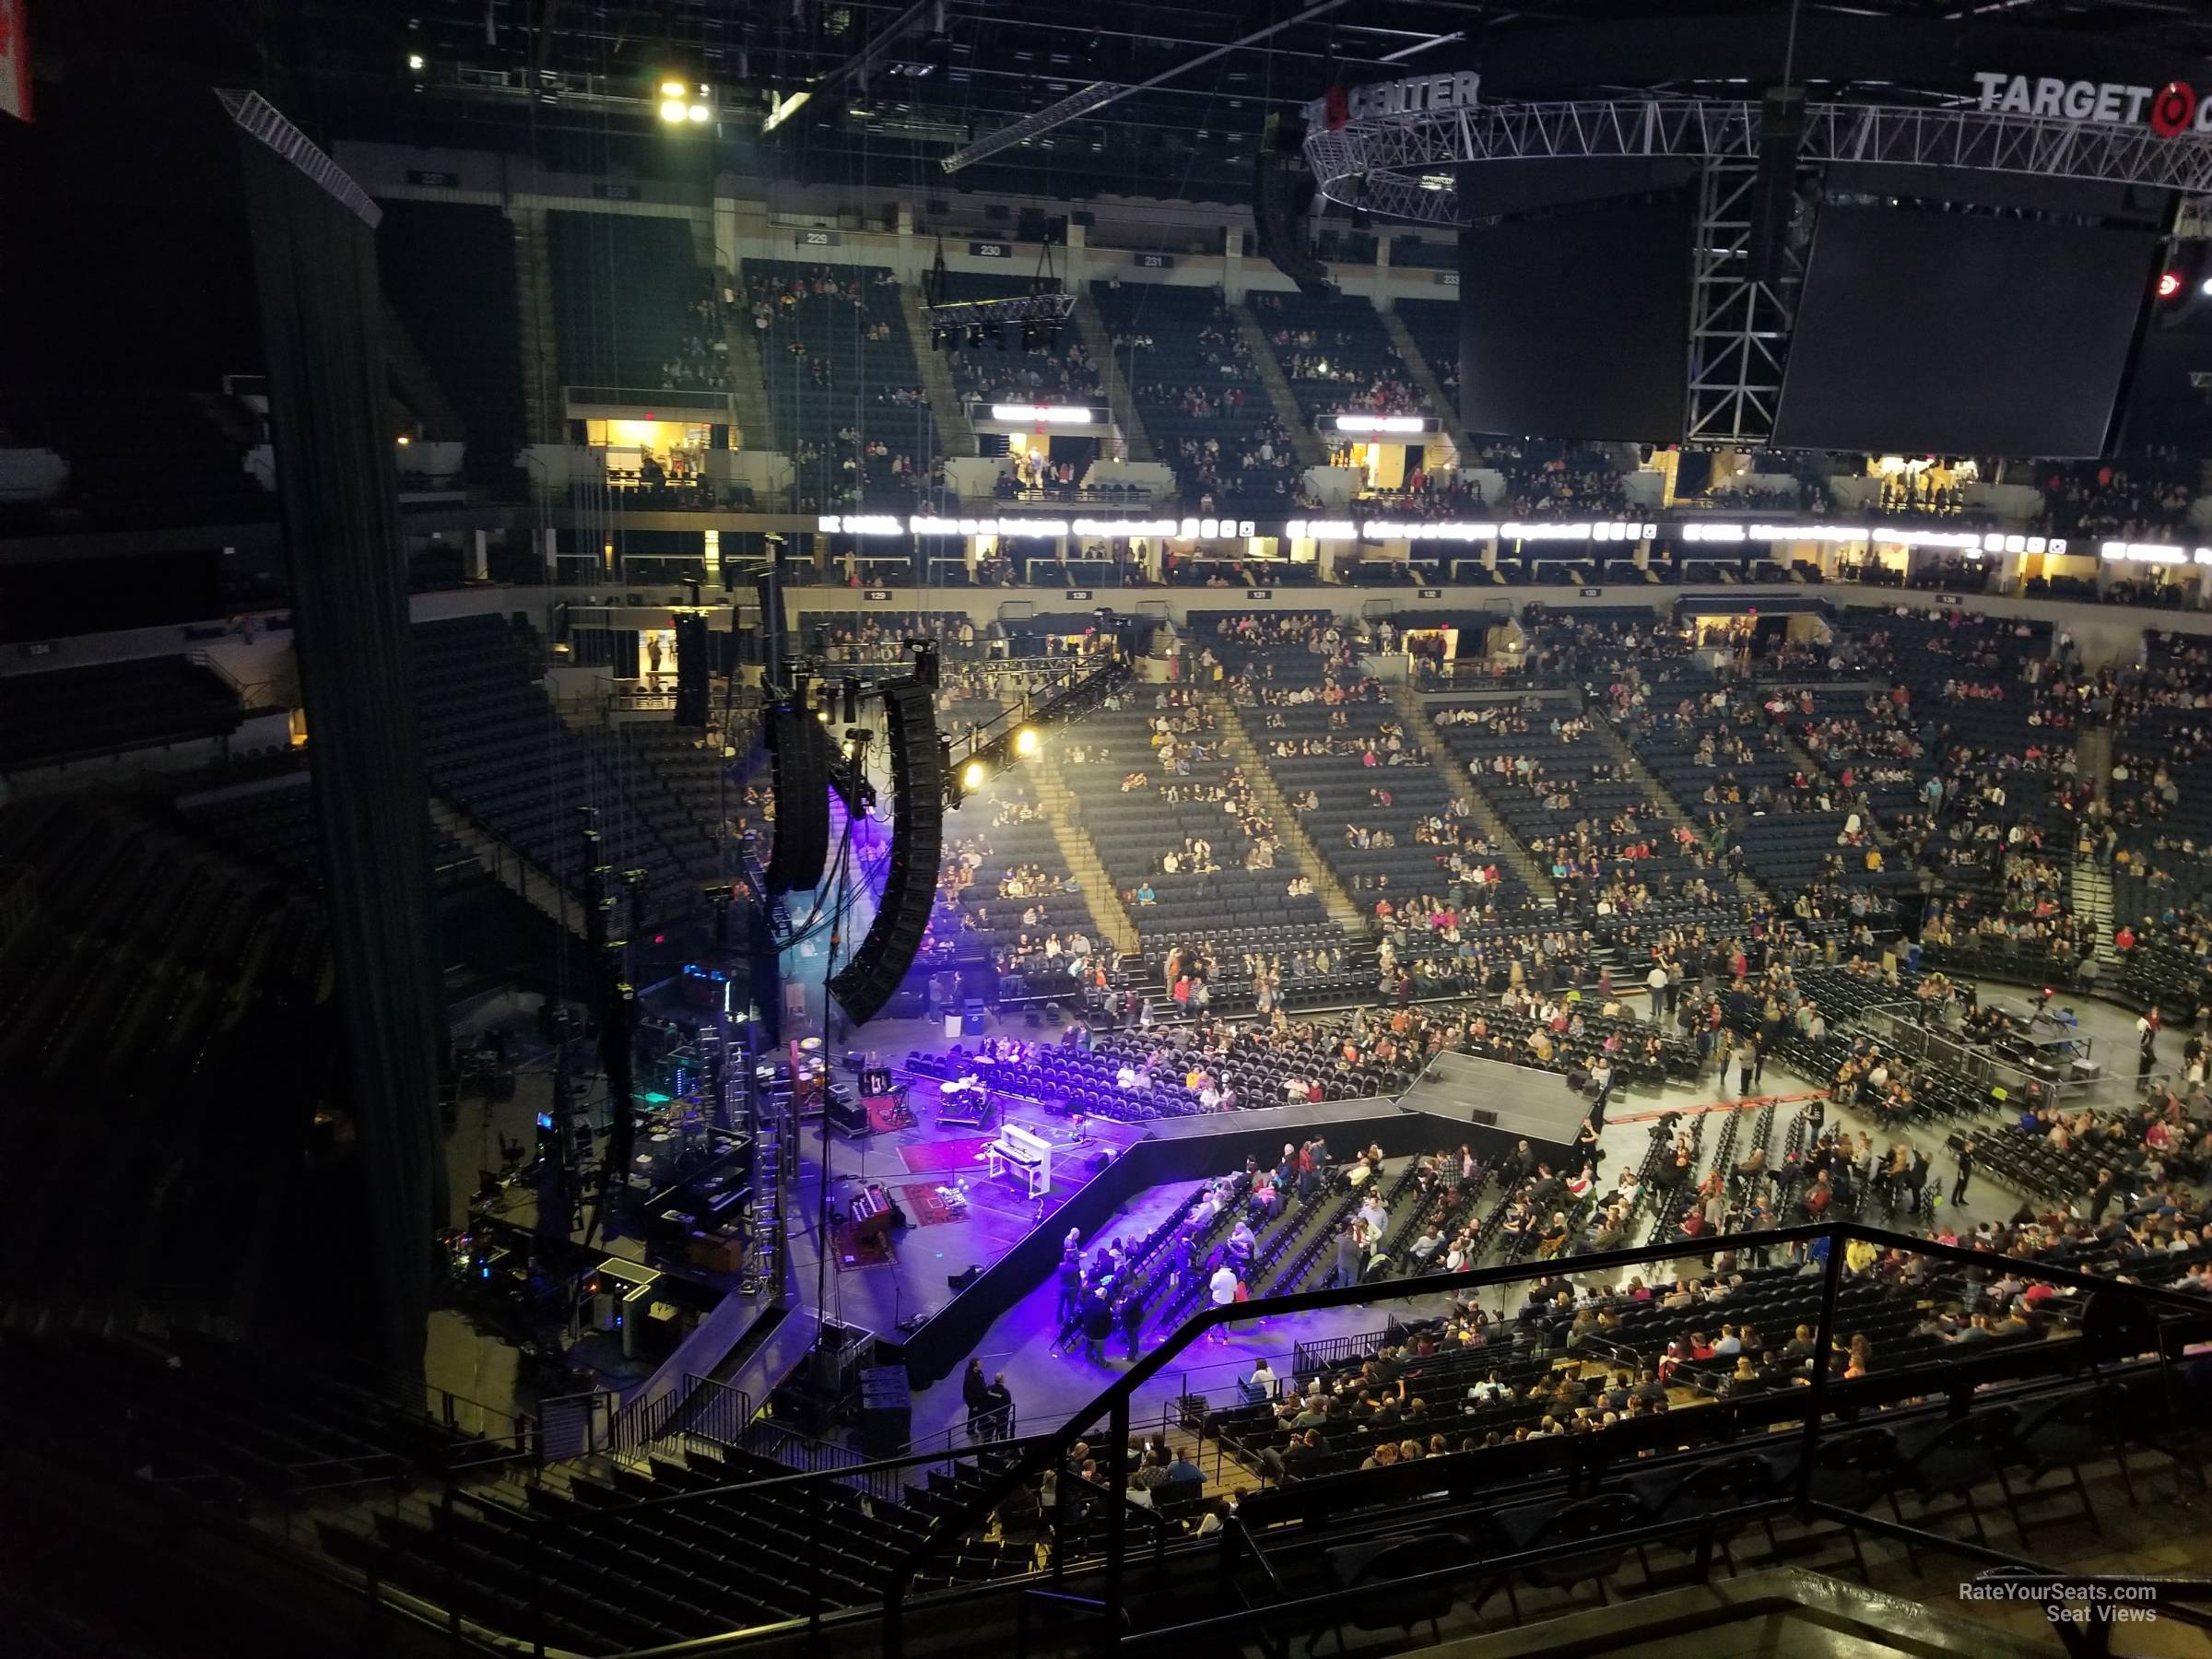 section 215, row j seat view  for concert - target center